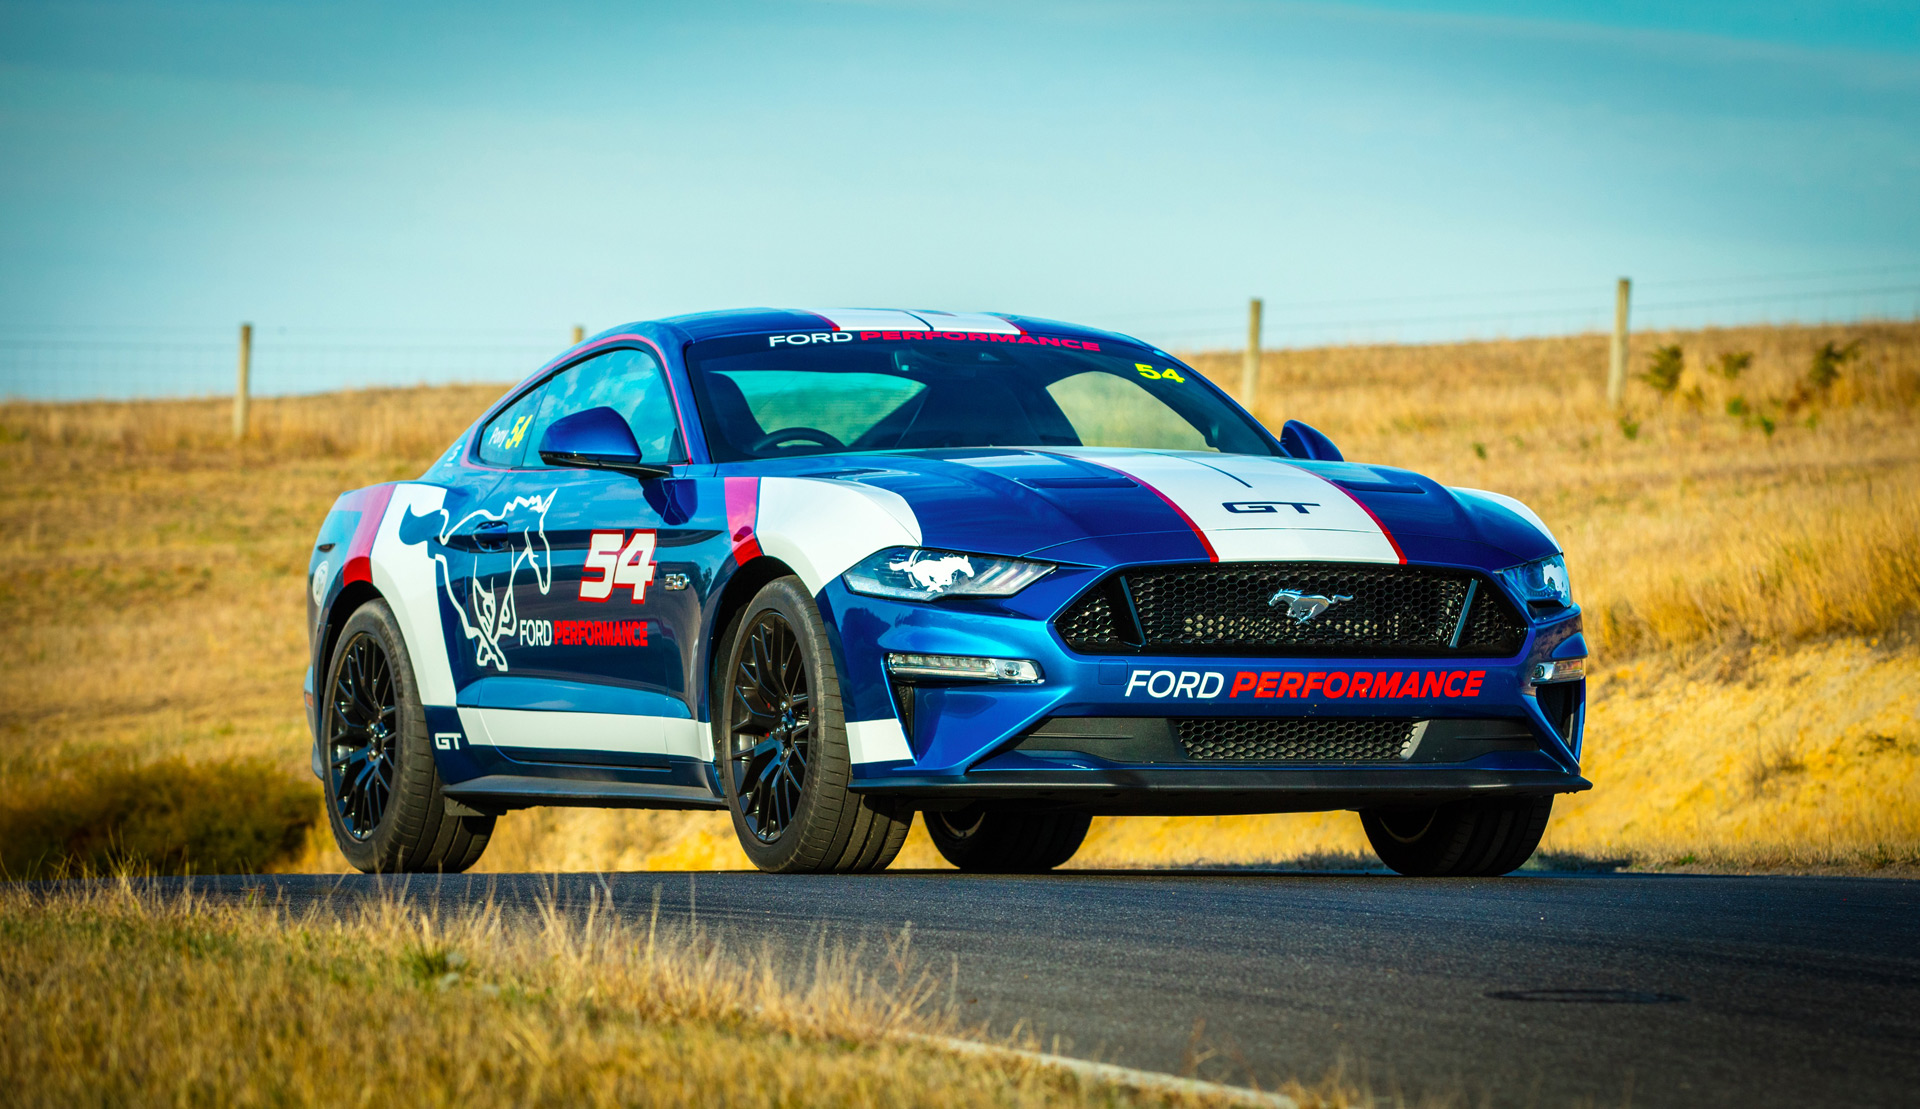 Ford Mustang to take on Australian Supercars series from 2019